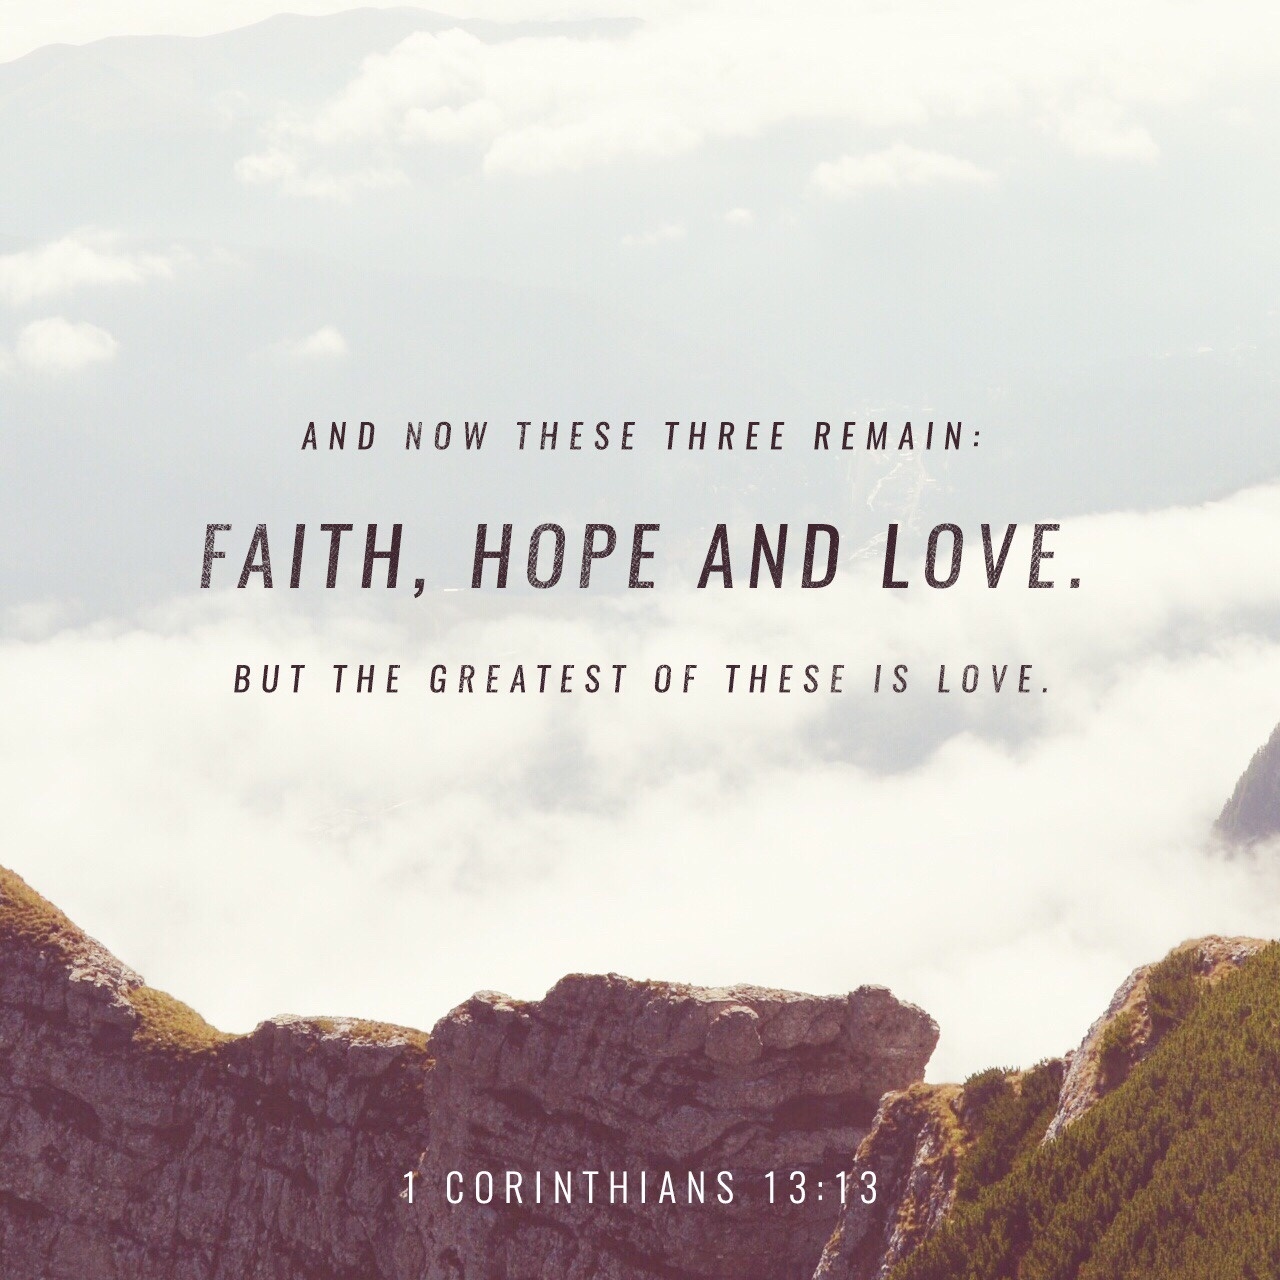 VOTD September 2 - But now faith, hope, love, abide these three; but the greatest of these is love. 1 Corinthians 13:12